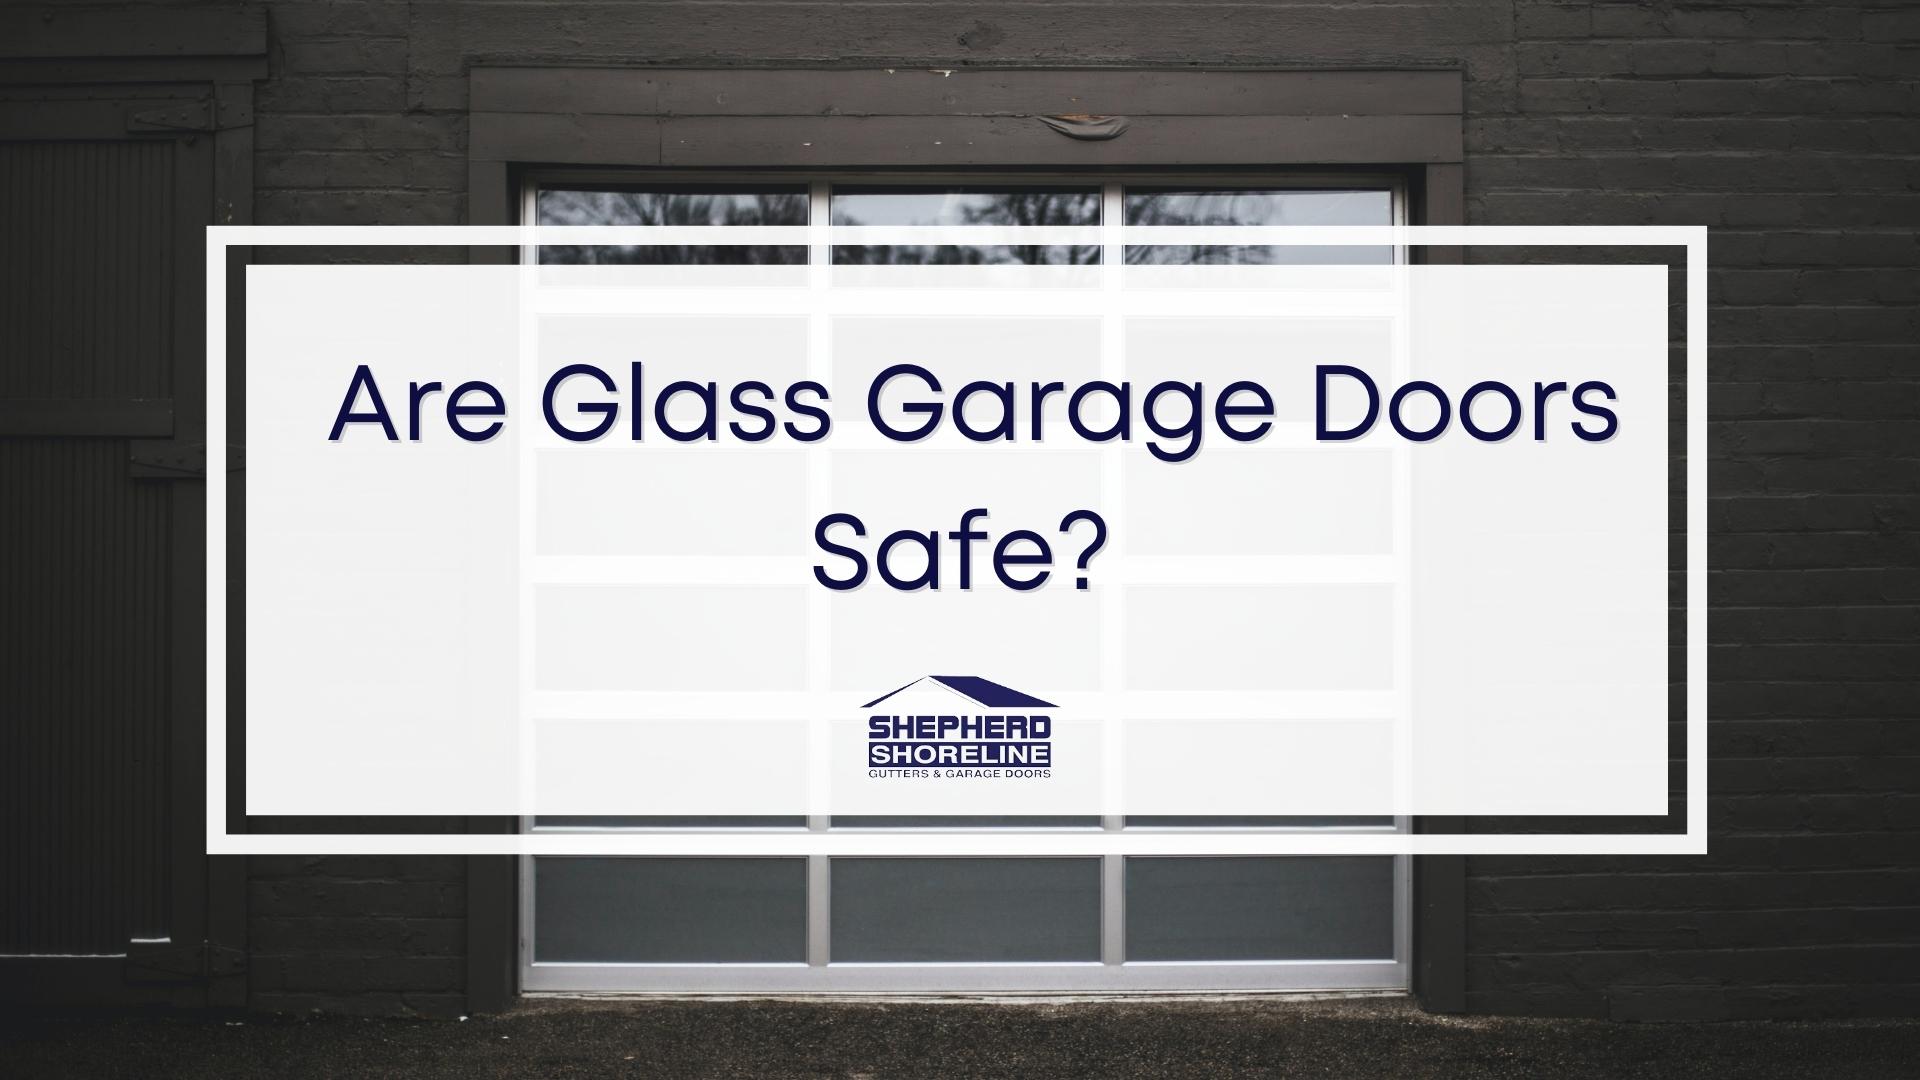 Featured image of the glass garage doors safety